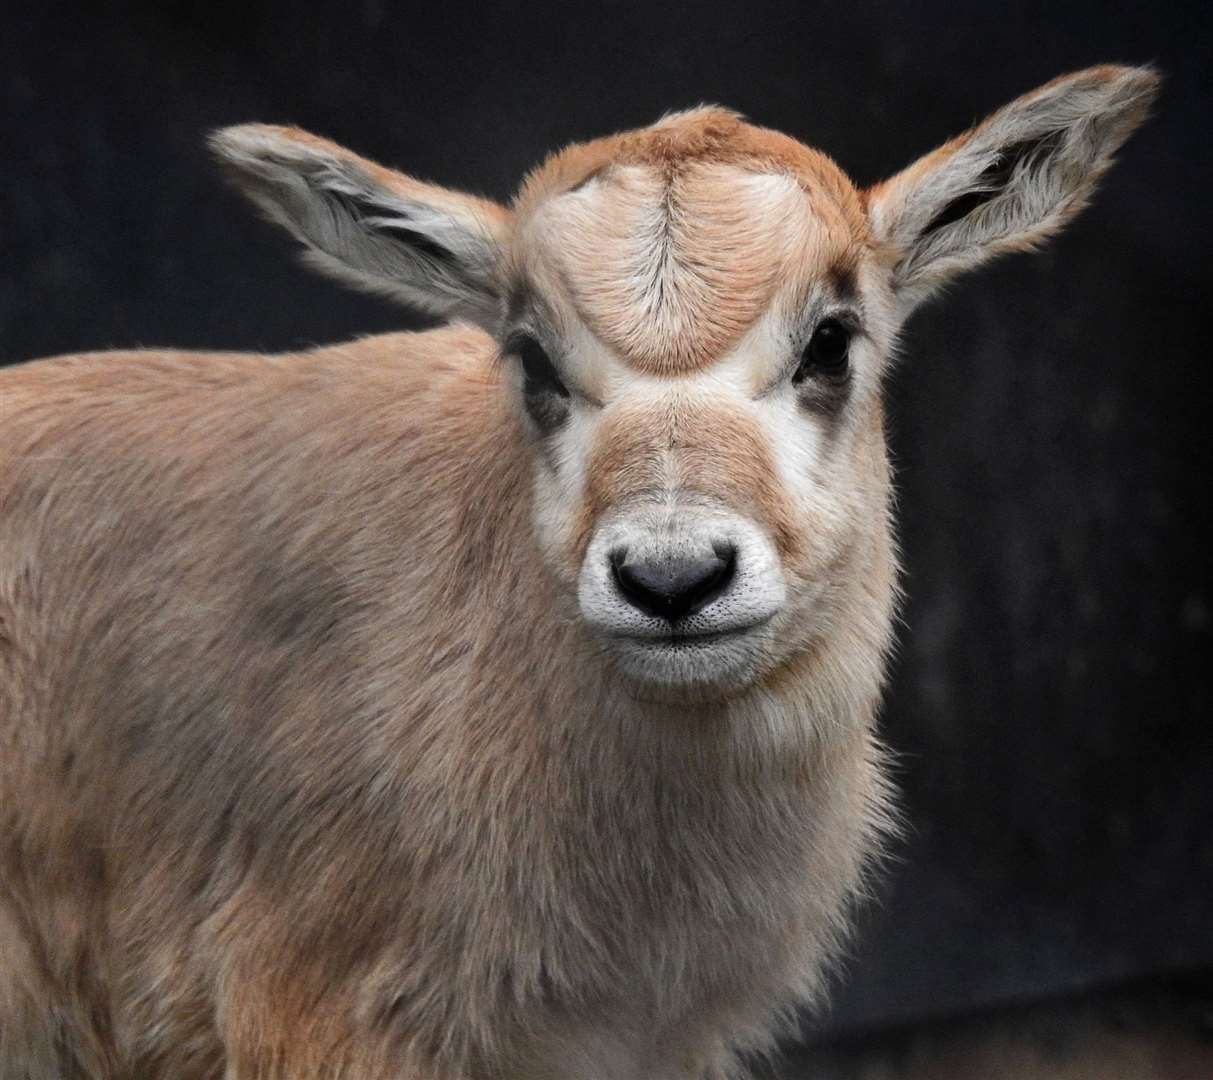 Africa Alive's new baby addax who was born on December 19. Picture: Africa Alive Reserve